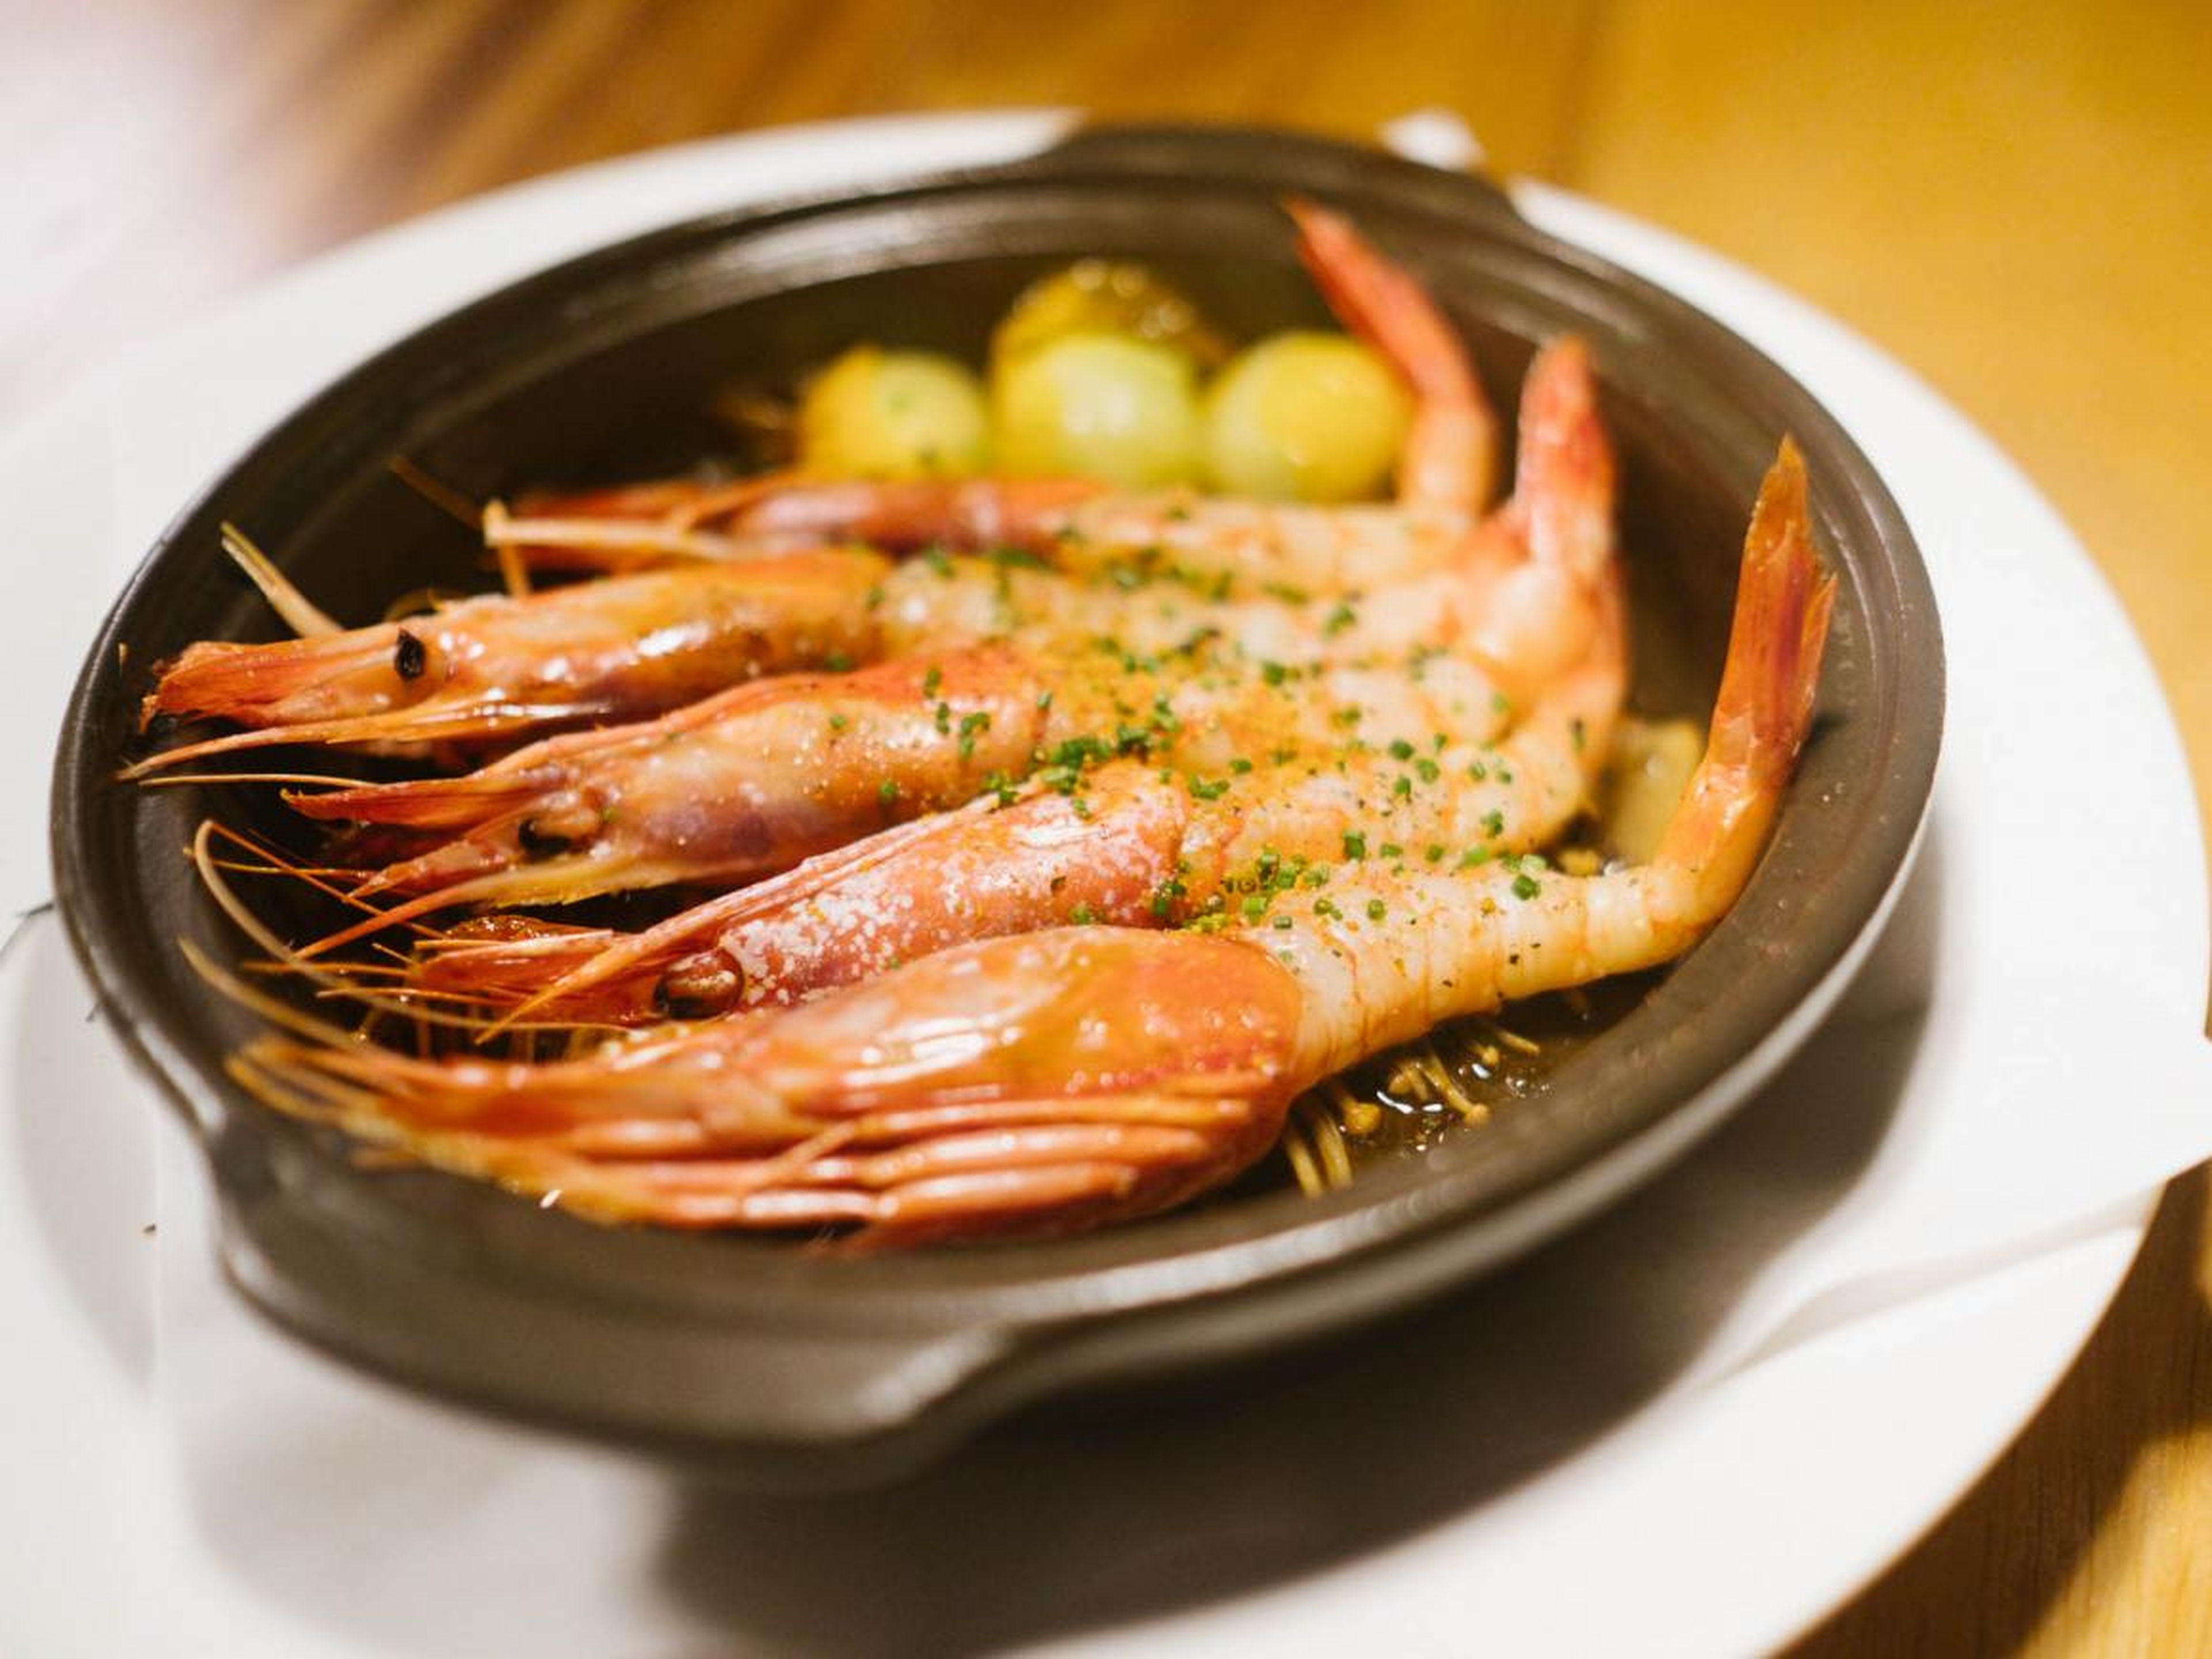 If you really want to go all out, Ibiza has its own edition of Nobu. I had the Gambas al Ajillo "Nobu Style," a classic Spanish dish ($50) which used shrimp from nearby Formentera. It was a simple, garlicky dish that shined with